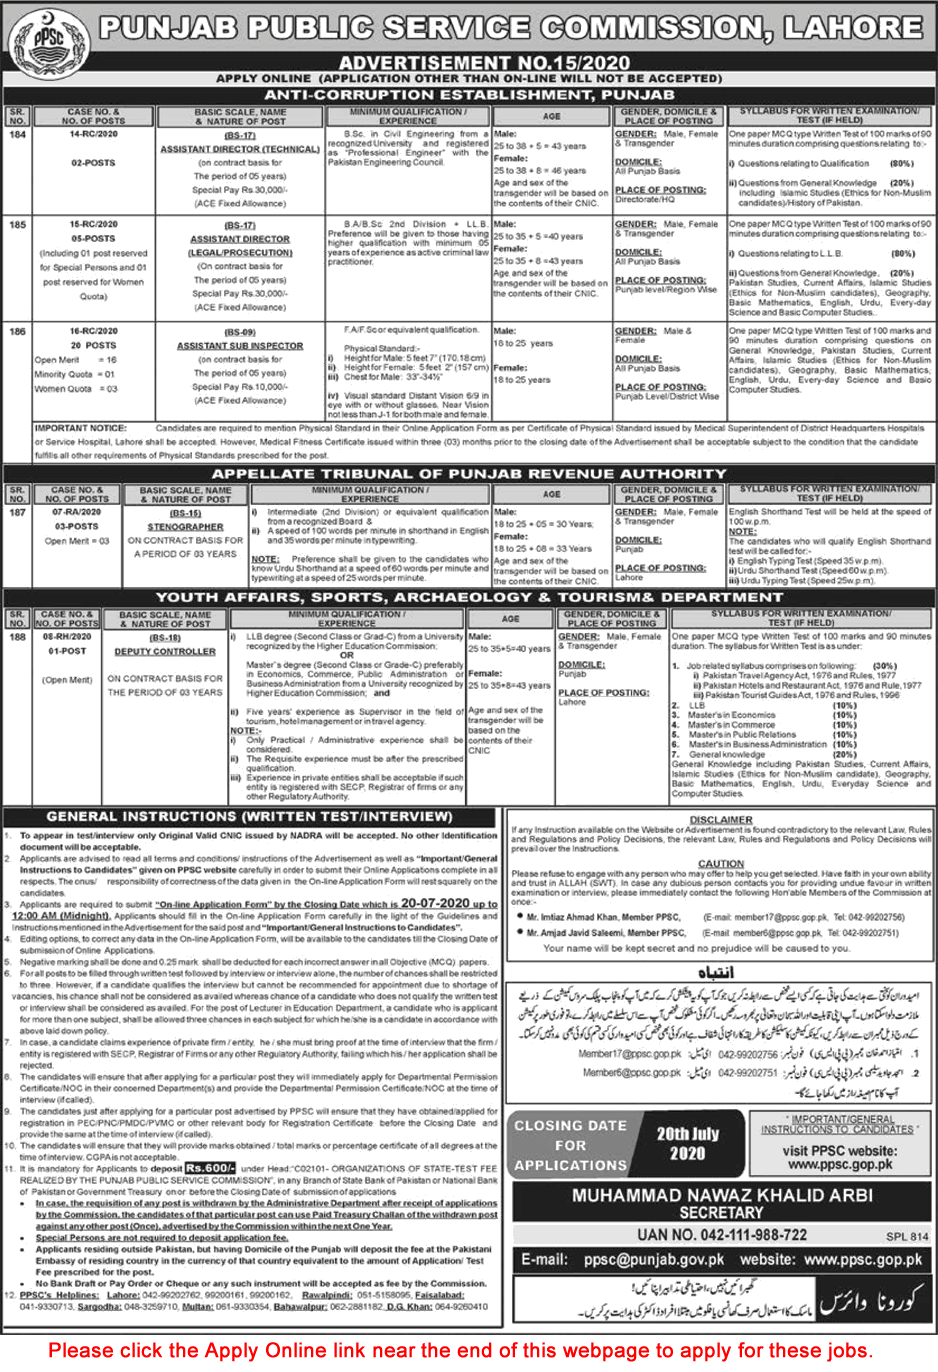 PPSC Jobs July 2020 Apply Online Consolidated Advertisement No 15/2020 Latest